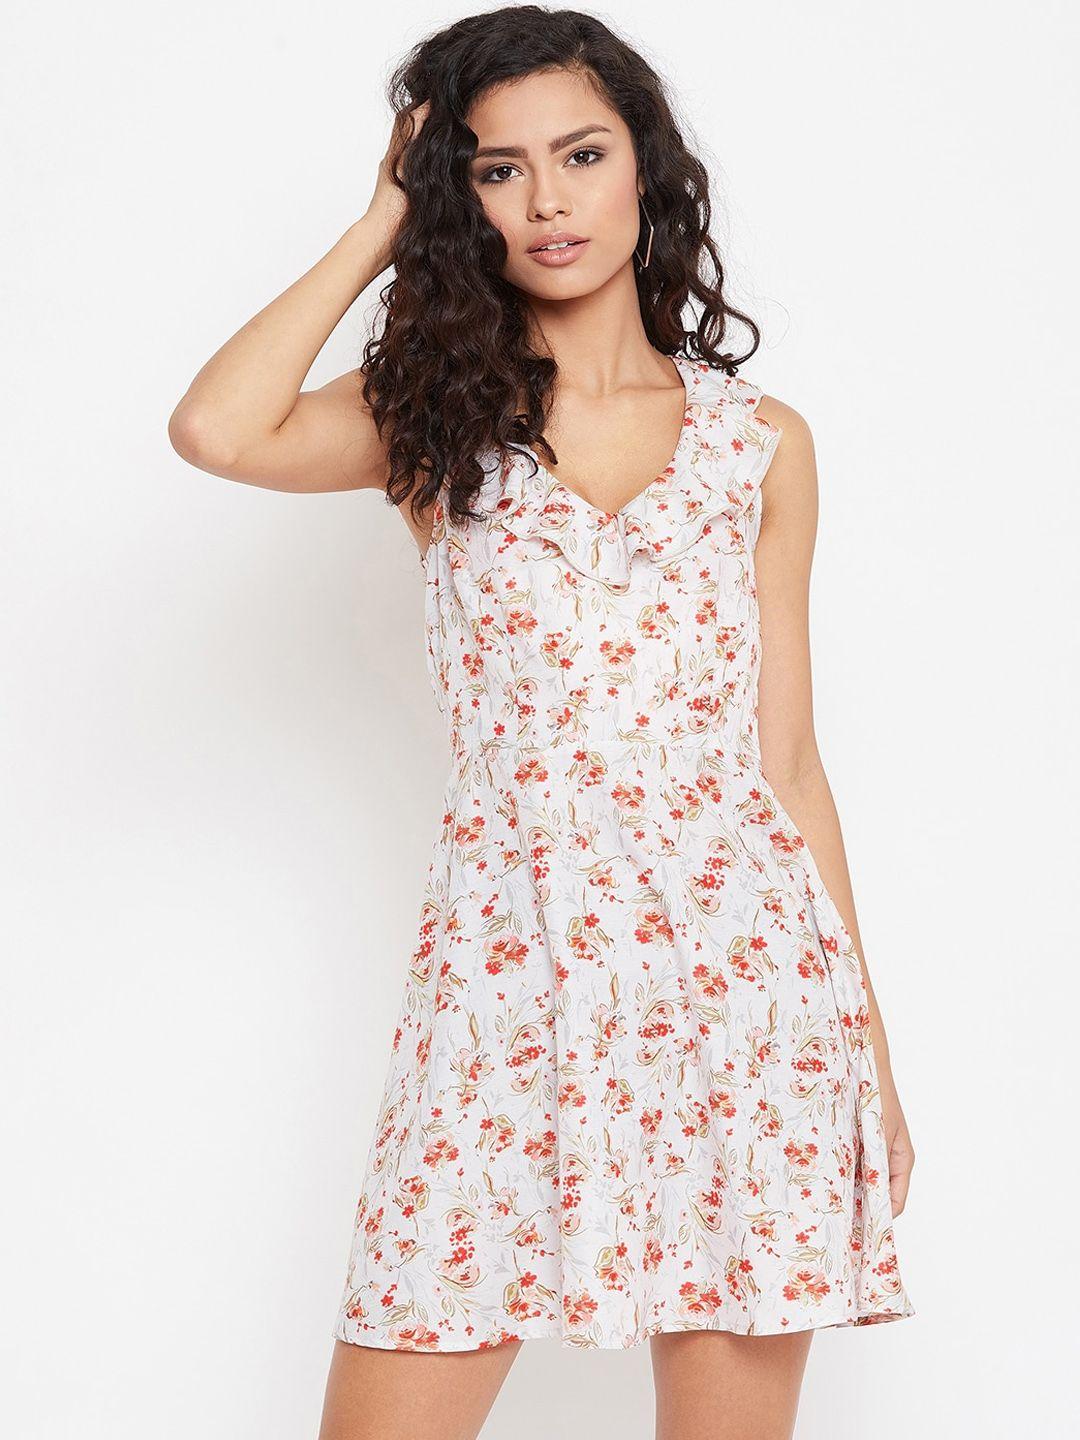 zastraa women white printed fit and flare dress